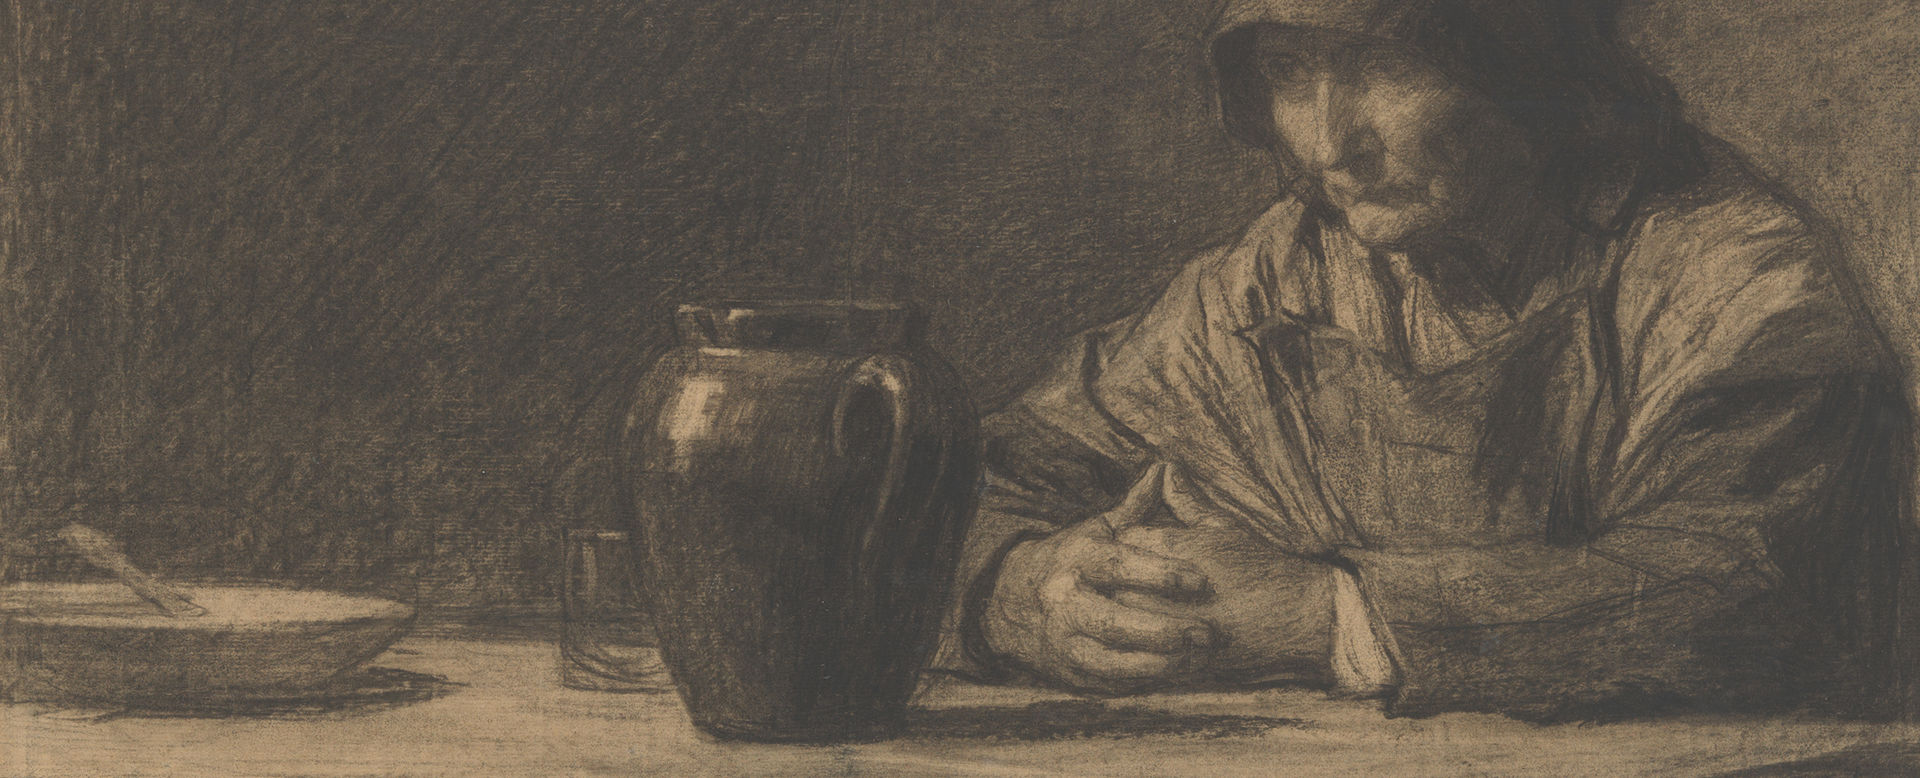 A charcoal drawing of a cloaked elderly figure seated at a table with a vase on it.